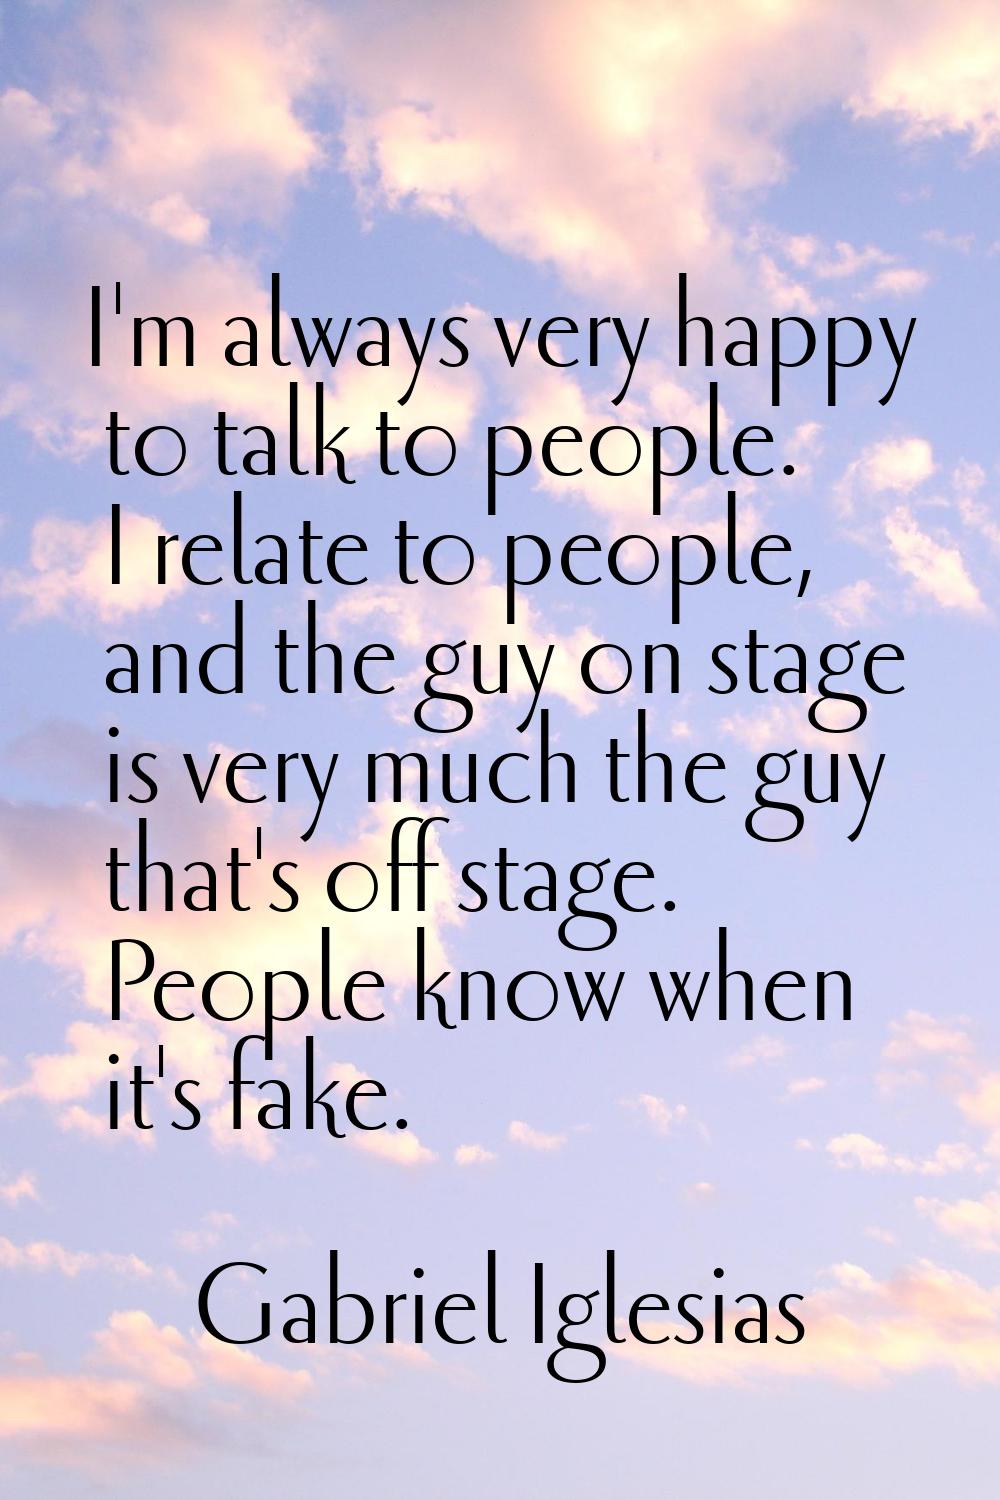 I'm always very happy to talk to people. I relate to people, and the guy on stage is very much the 